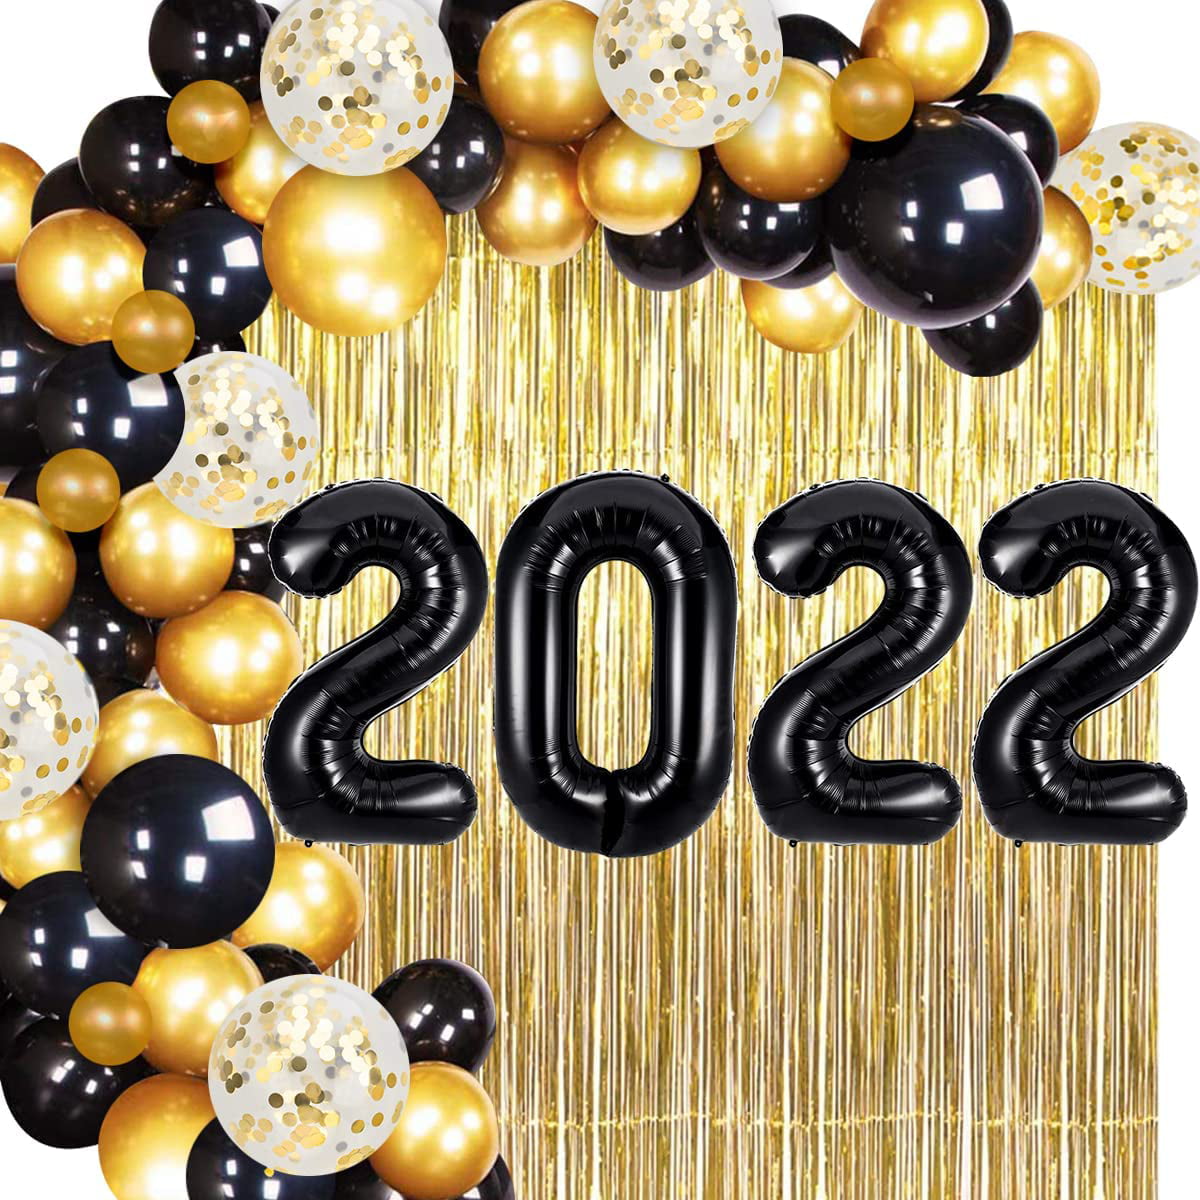 Happy New Year Banner 2022 with Gold Foil Fringe Curtain and 2022 Balloons Huge Happy New Year Decorations 2022 Set NYE Photo Booth Props 2022 for New Years Eve Party Supplies 2022 Pack of 50 